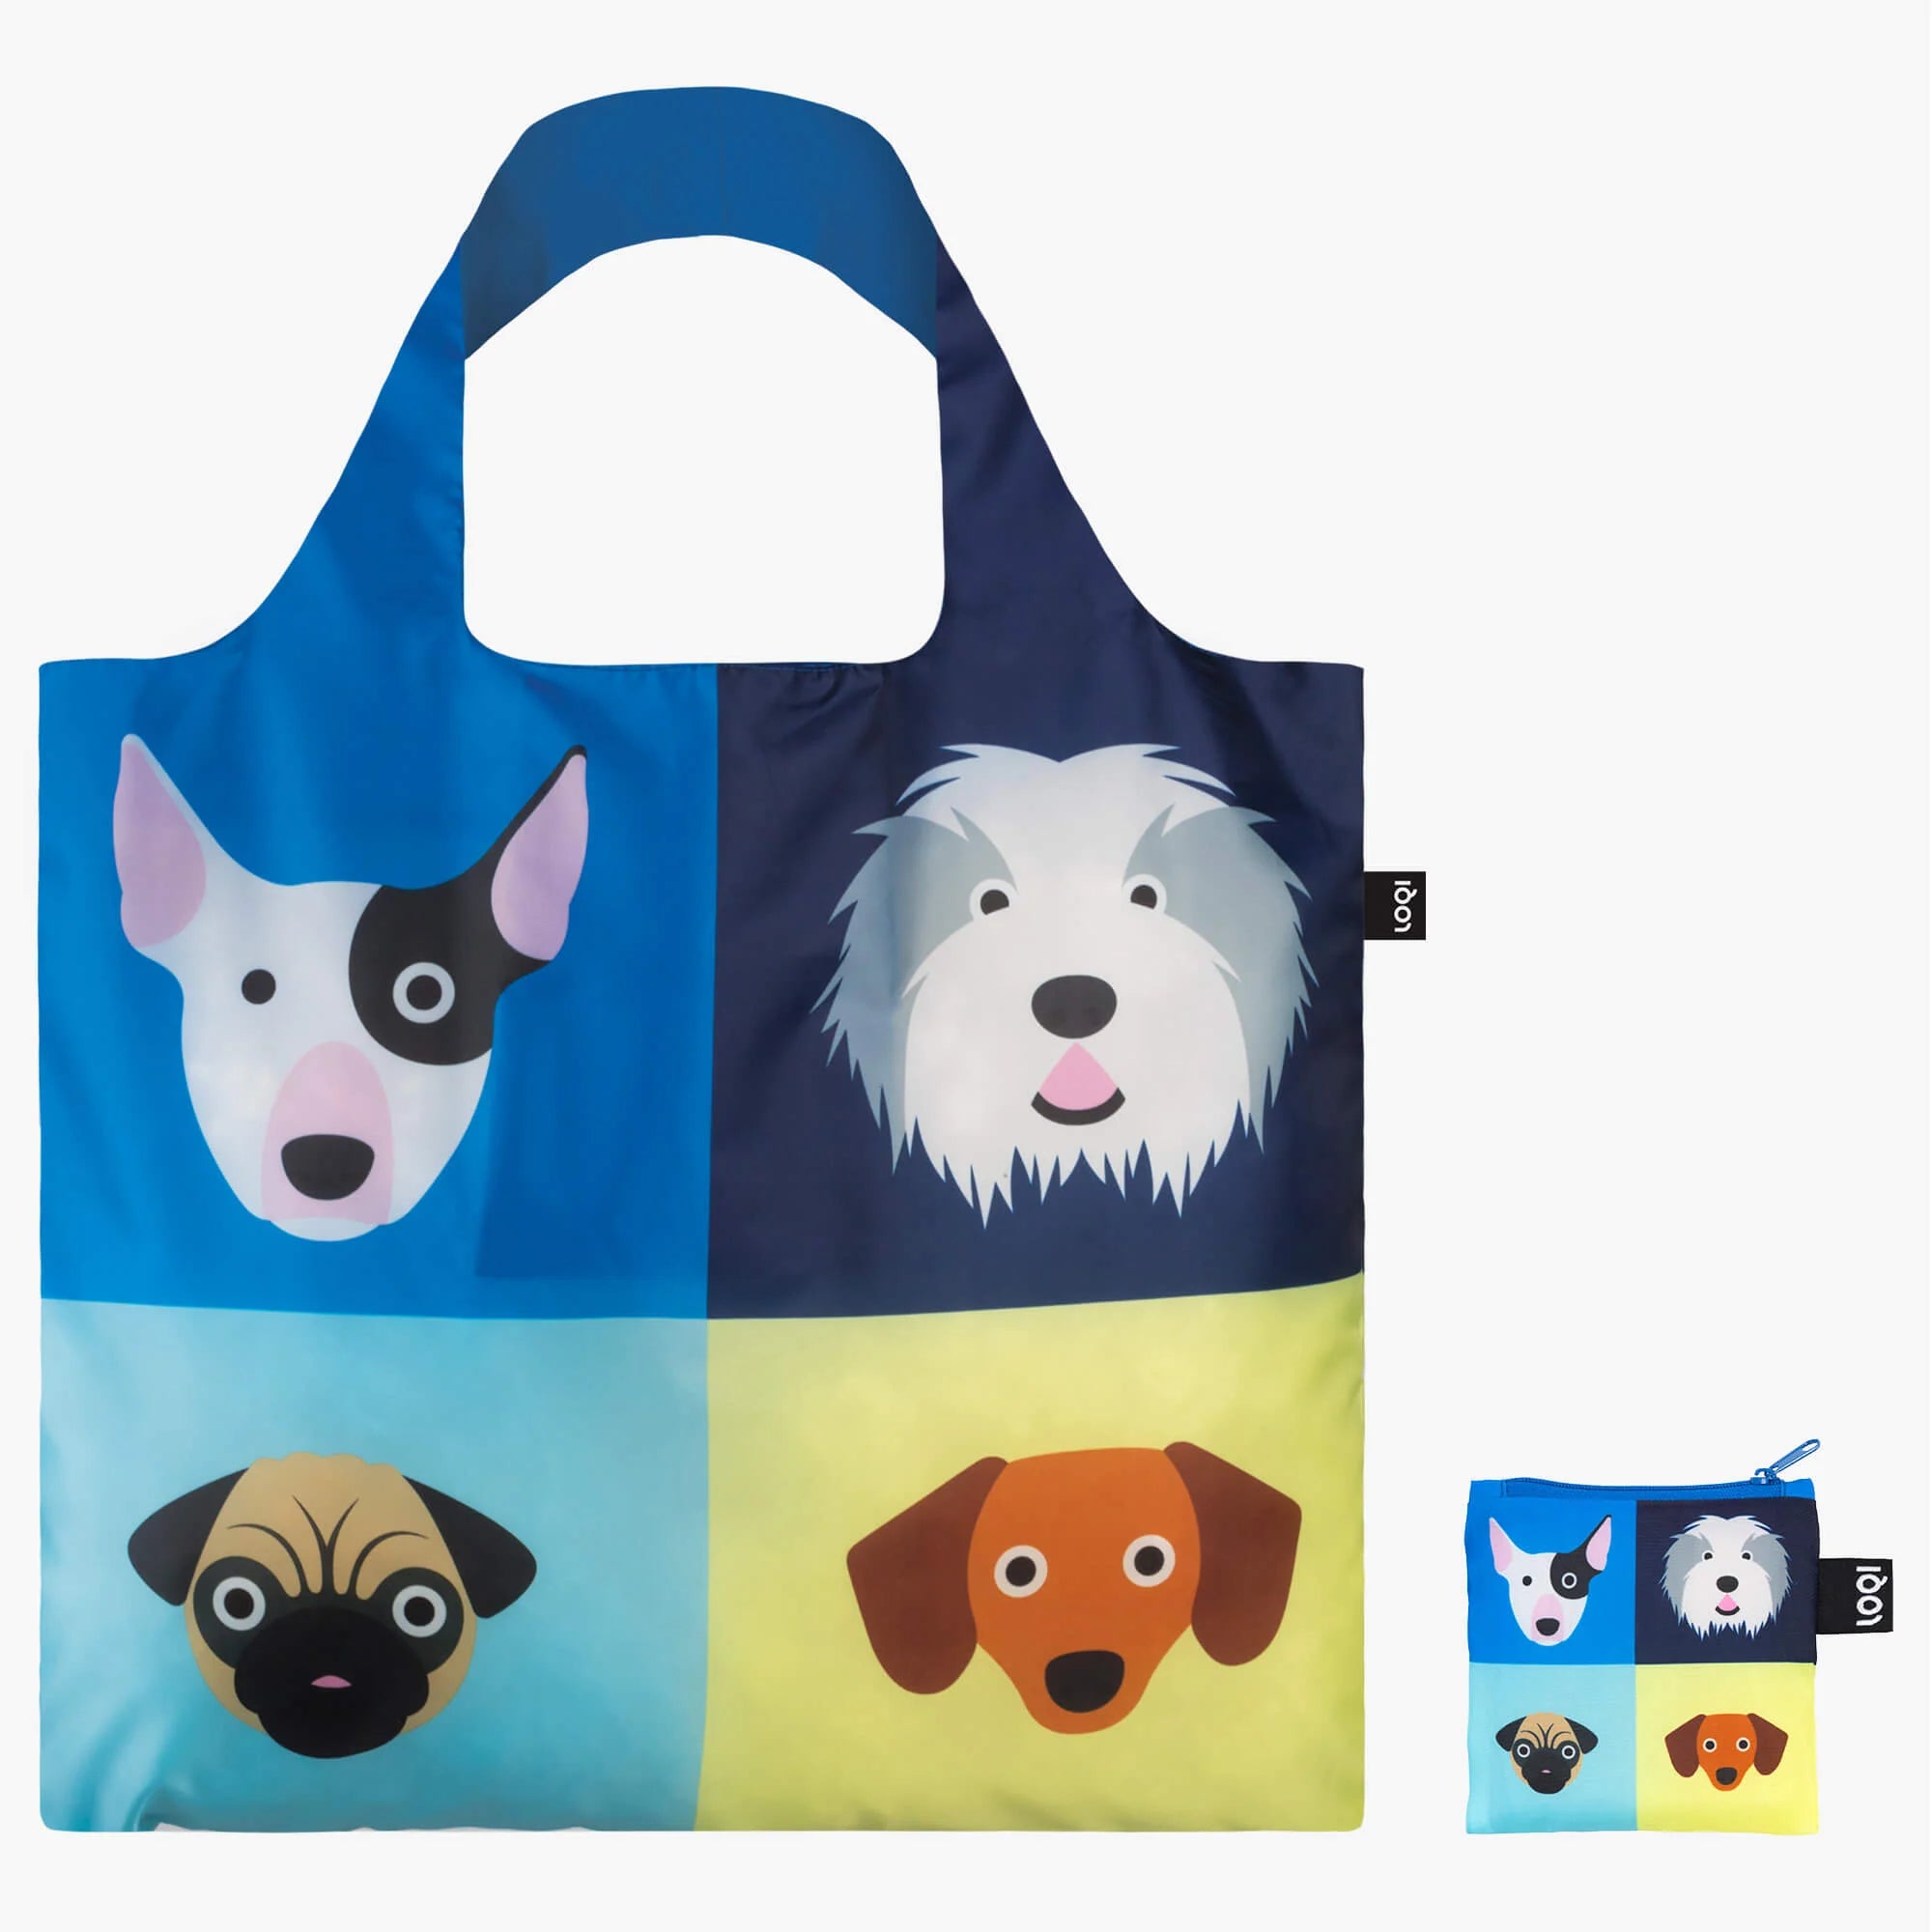 Sustainable Living Loqi Stephen Cheetham Dogs Recycled Bag by Weirs of Baggot Street